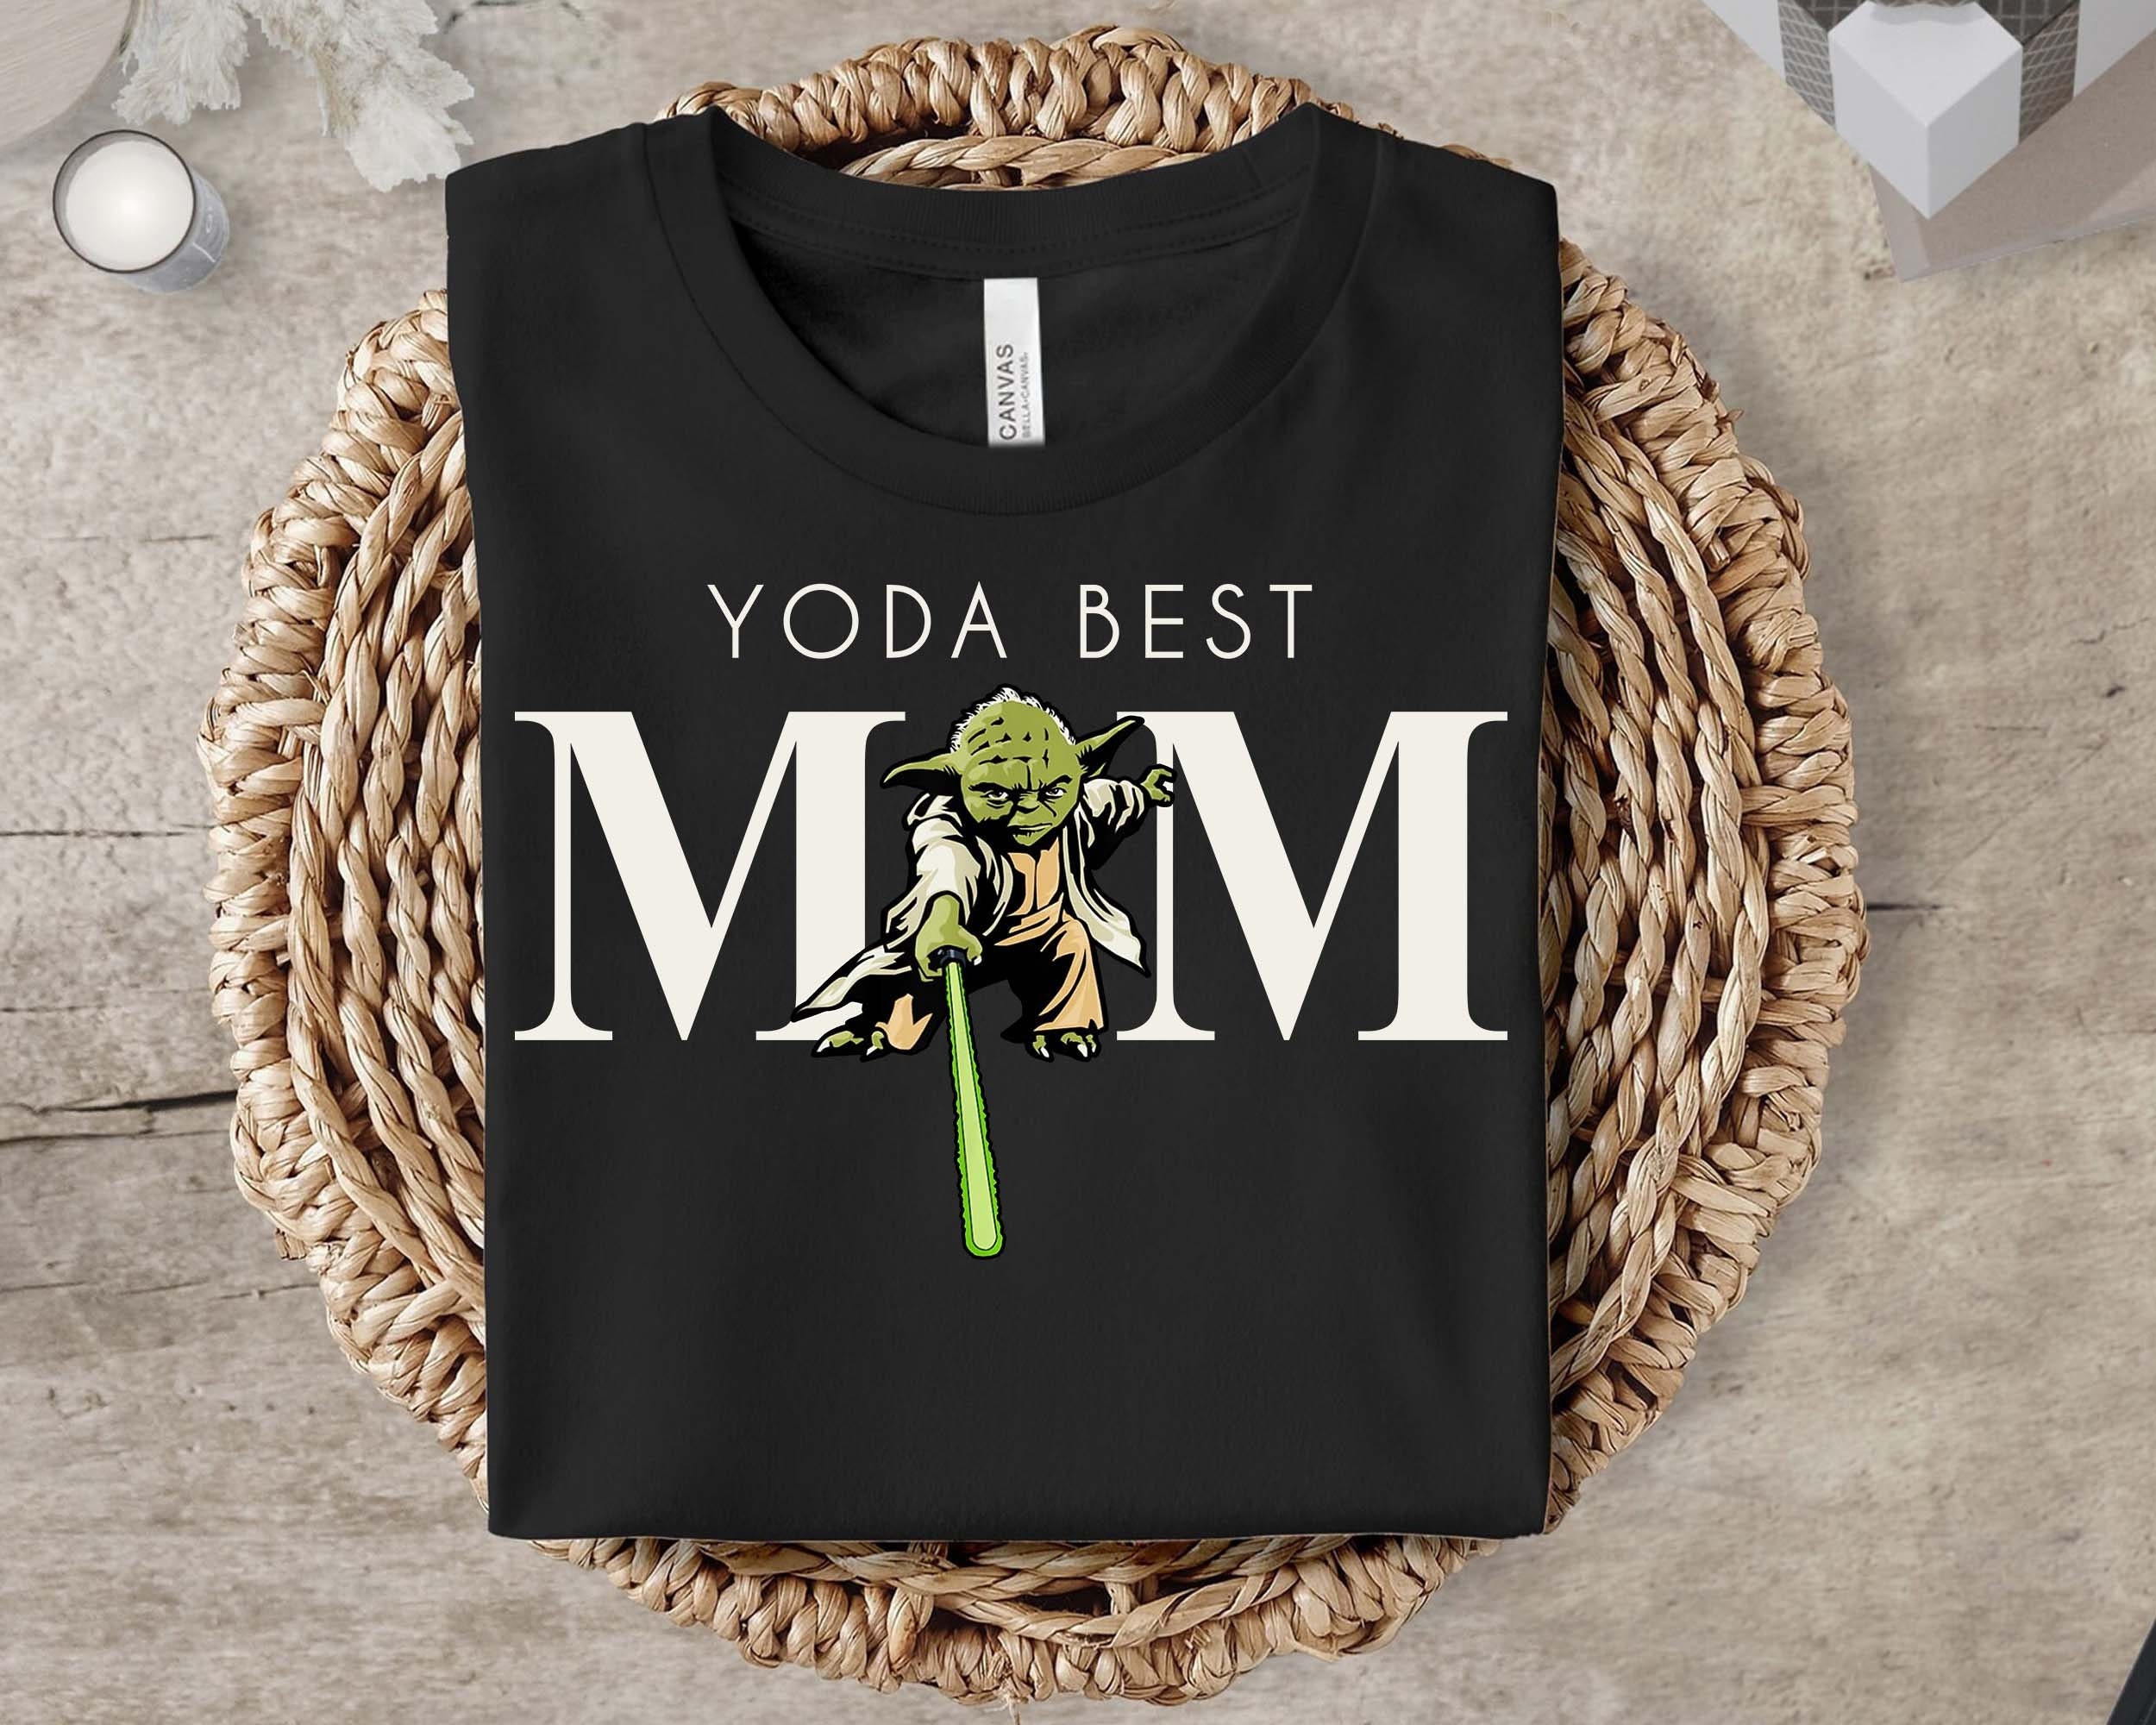 Yoda Best Mom Shirt Mothers Day Shirt Star Wars Shirt Great Mothers Day Gift Ideas Women Mom Mama Nana Full Size Up To 5xl